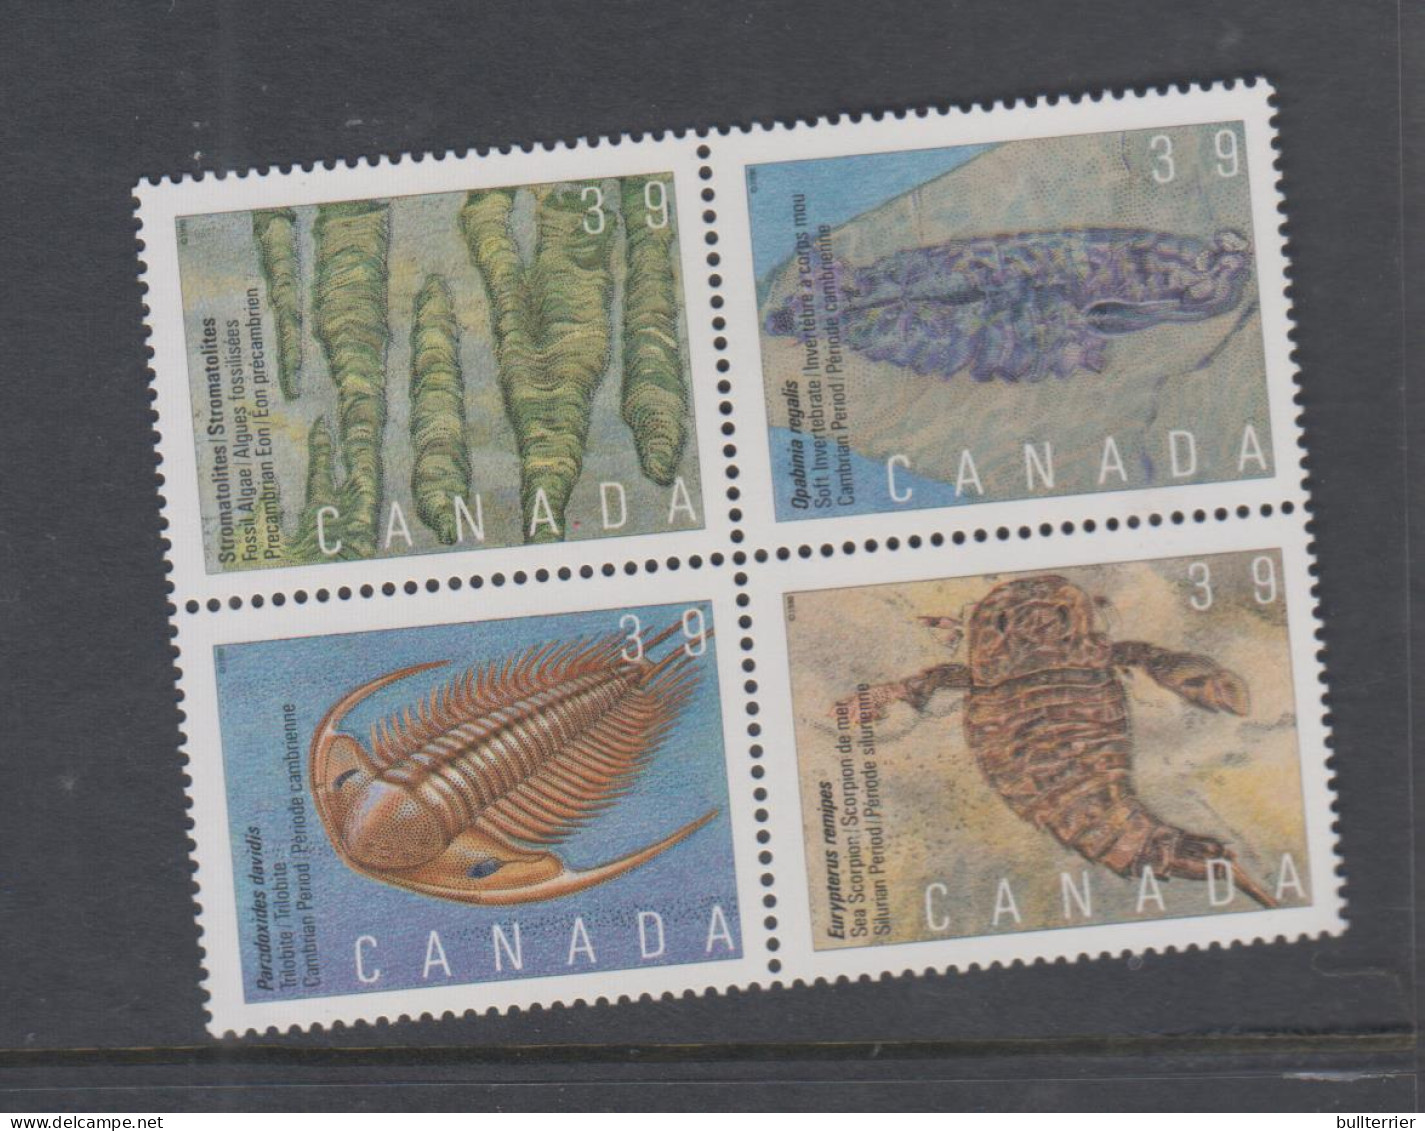 FOSSILS - CANADA  - FOSSILS SET OF 4 IN BLOCK  MINT NEVER HINGED - Fossiles